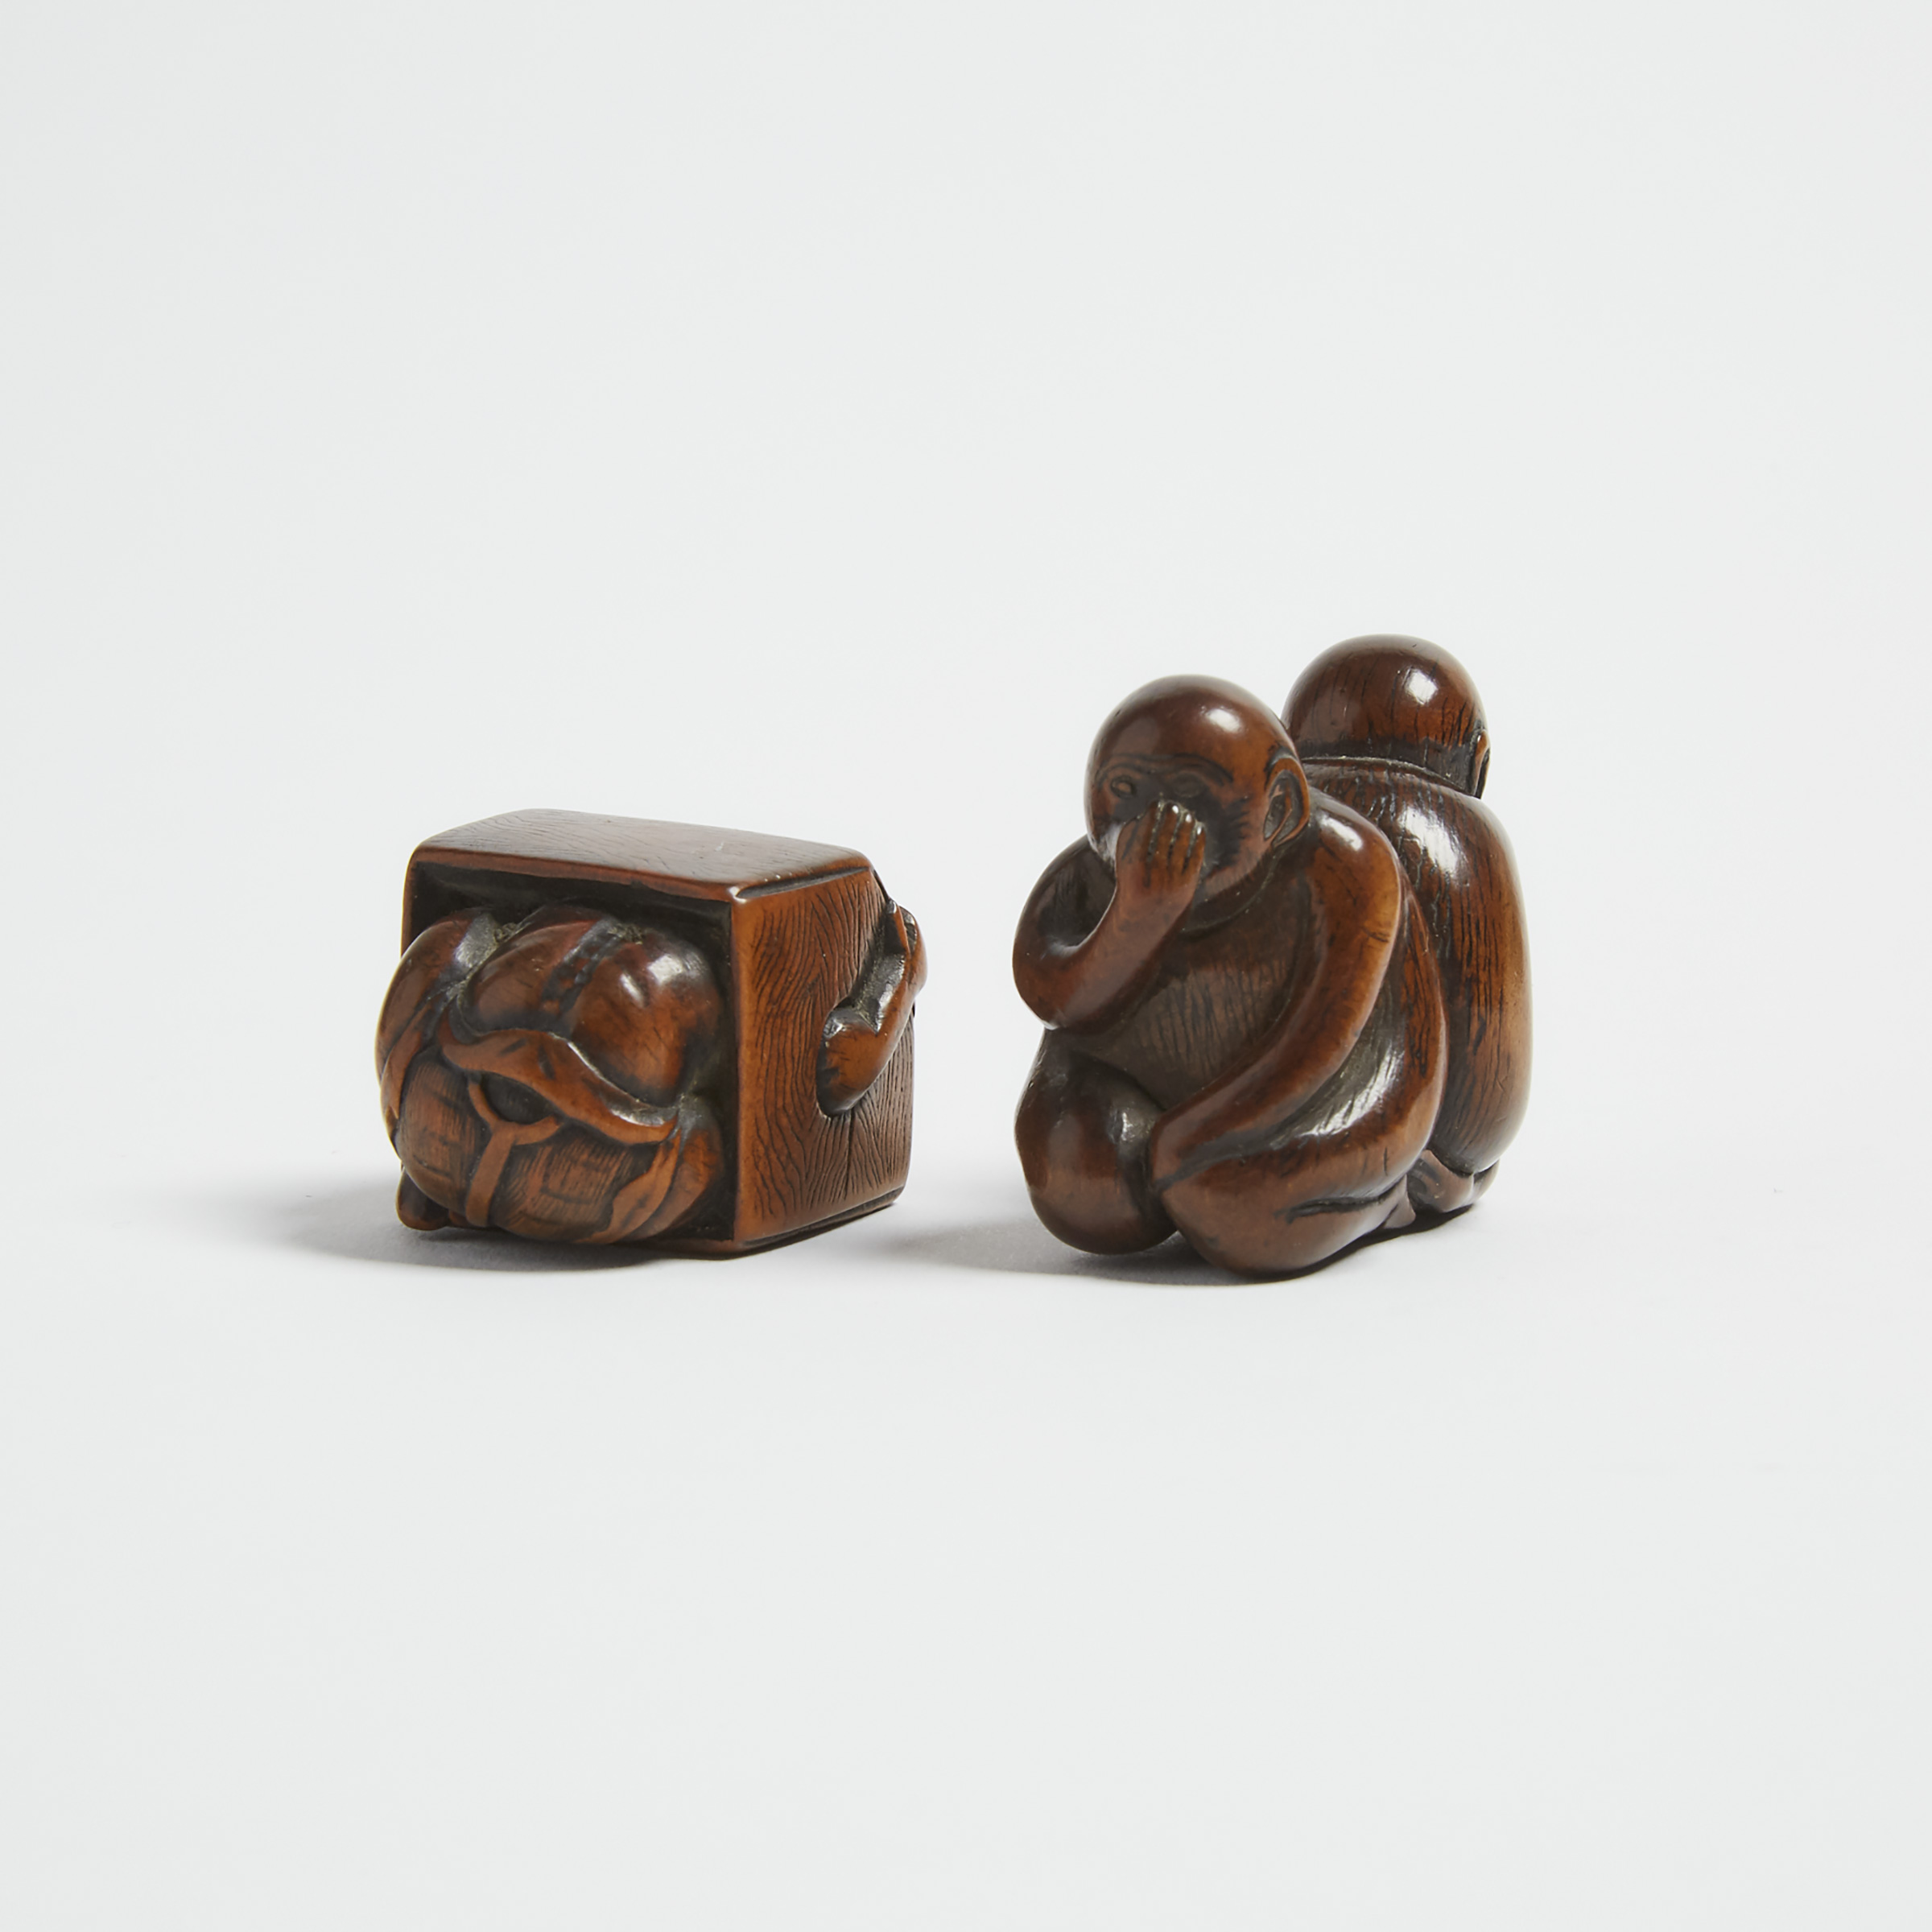 Two Wood Netsuke of an Oni in a Box and Monkeys, 18th/19th Century